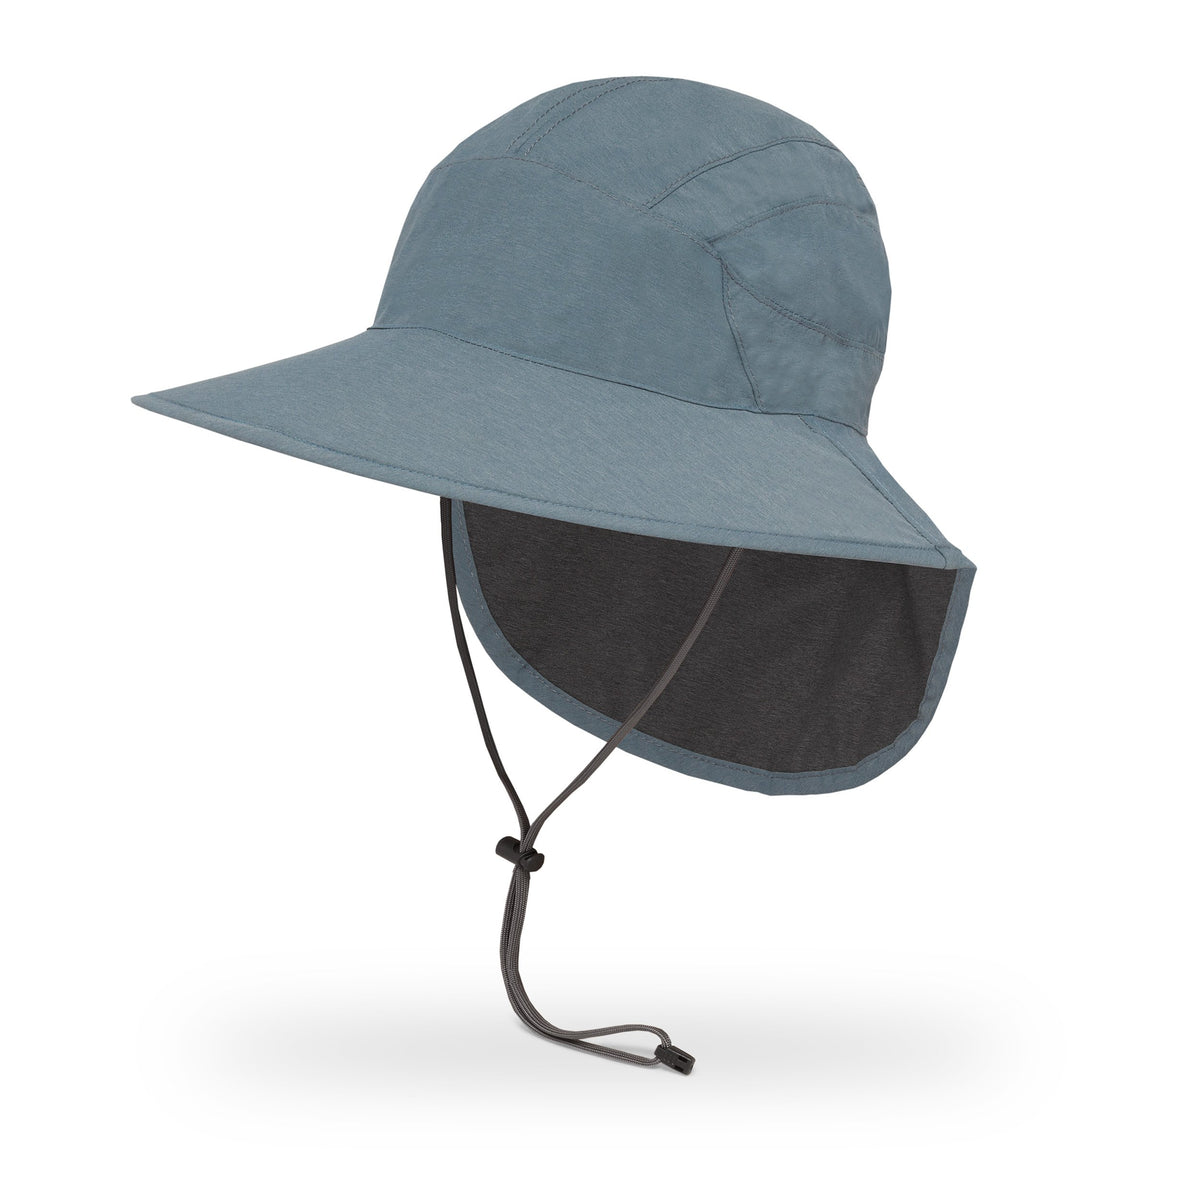 Sunday Afternoons Ultra Adventure Storm Hat (Taupe, S/M)